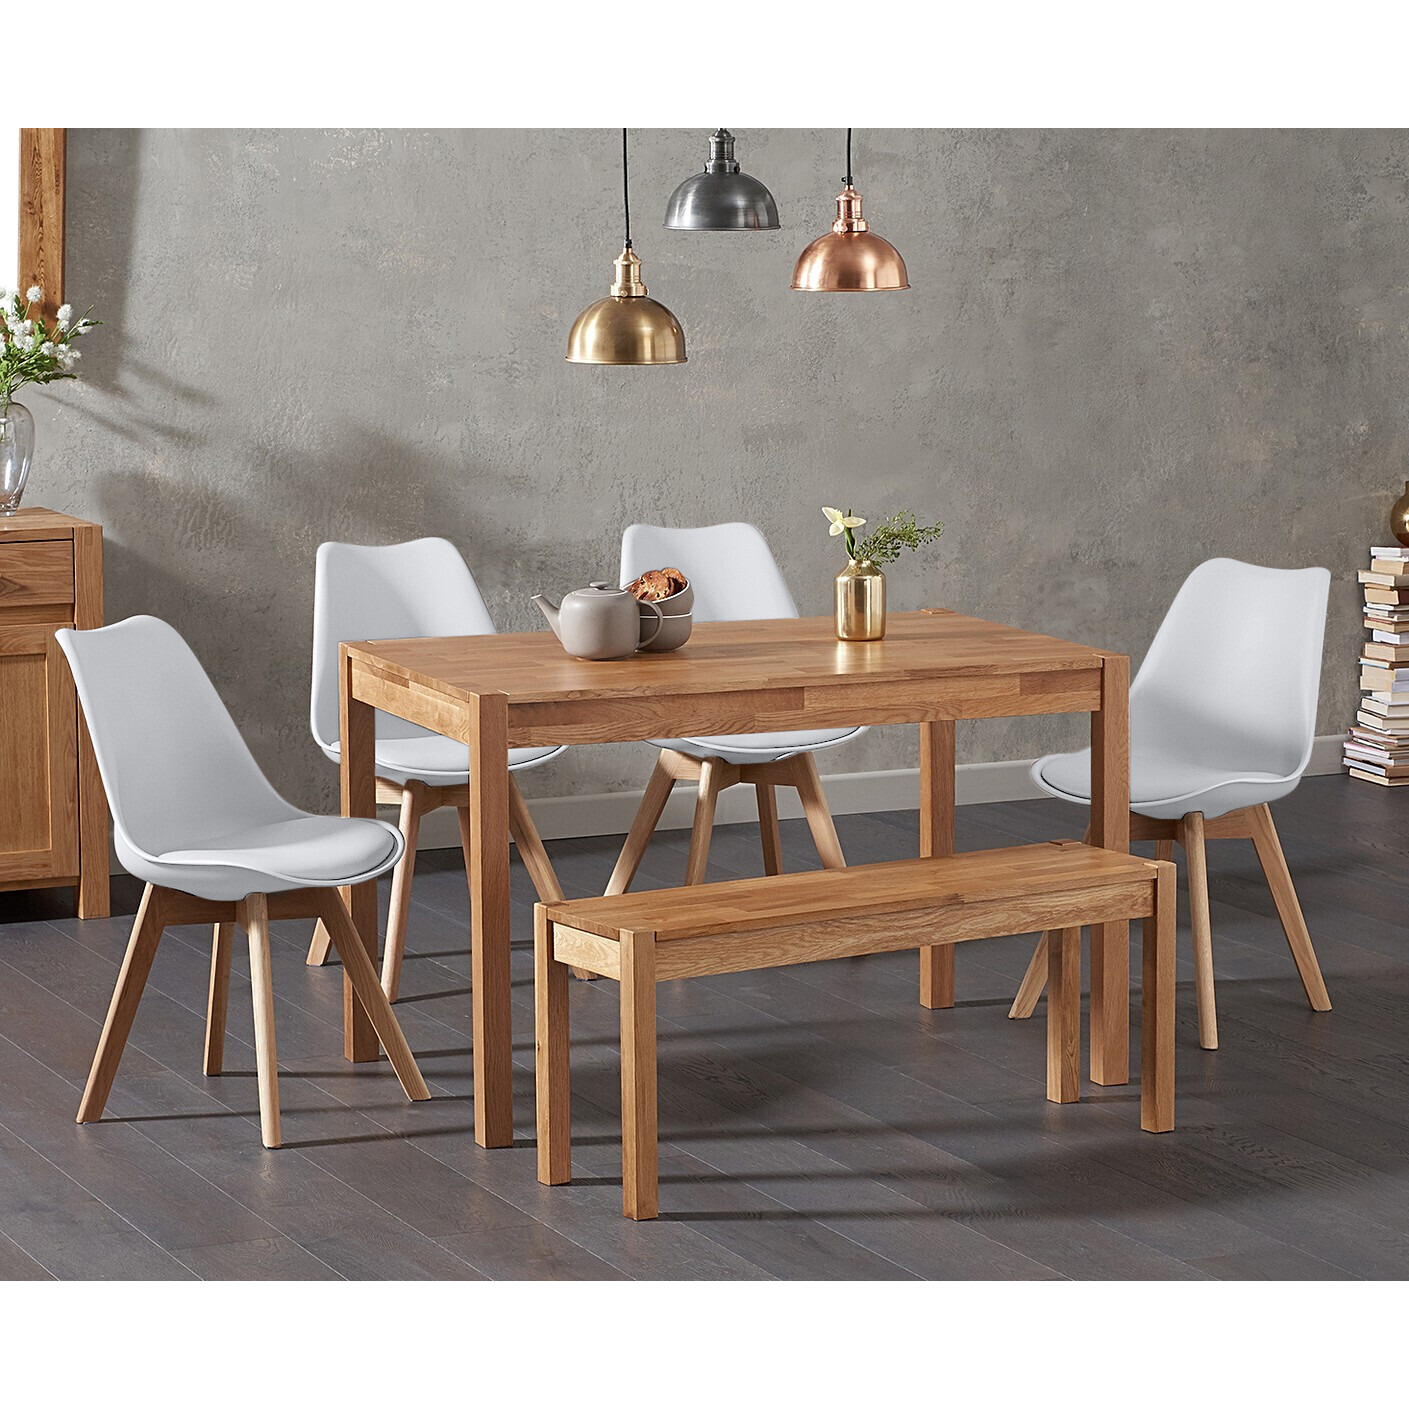 York 120cm Solid Oak Dining Table With 2 White Orson Faux Leather Chairs And 1 York Bench